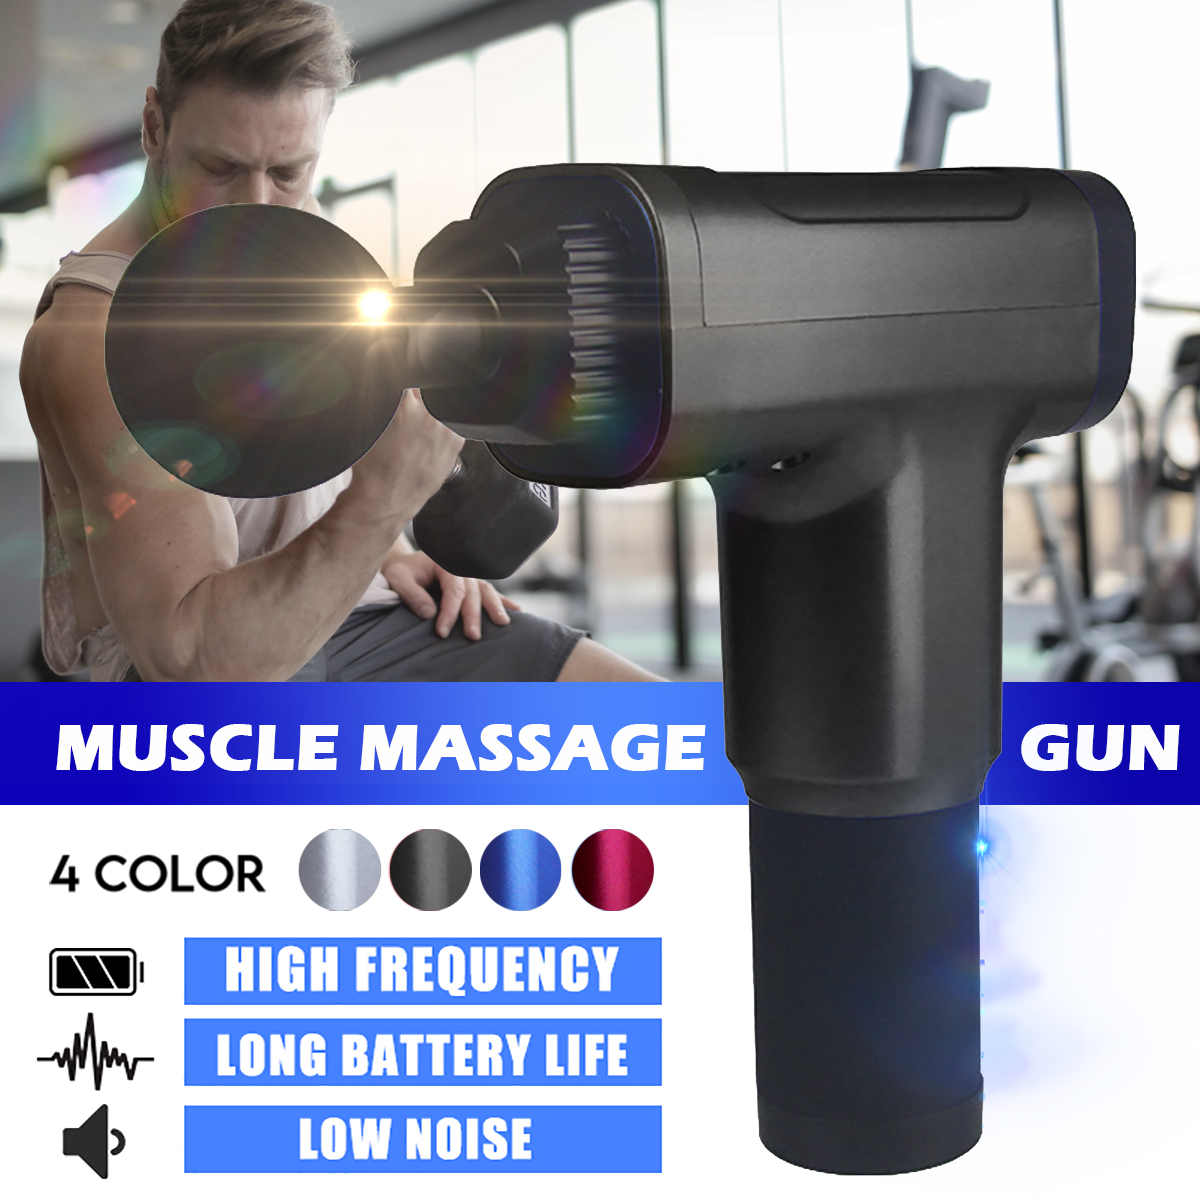 2800rmin-4-Speed-Muscle-Relief-Massage-Therapy-Vibration-Deep-Tissue-Electric-Massager-Percussion-Ma-1715477-3